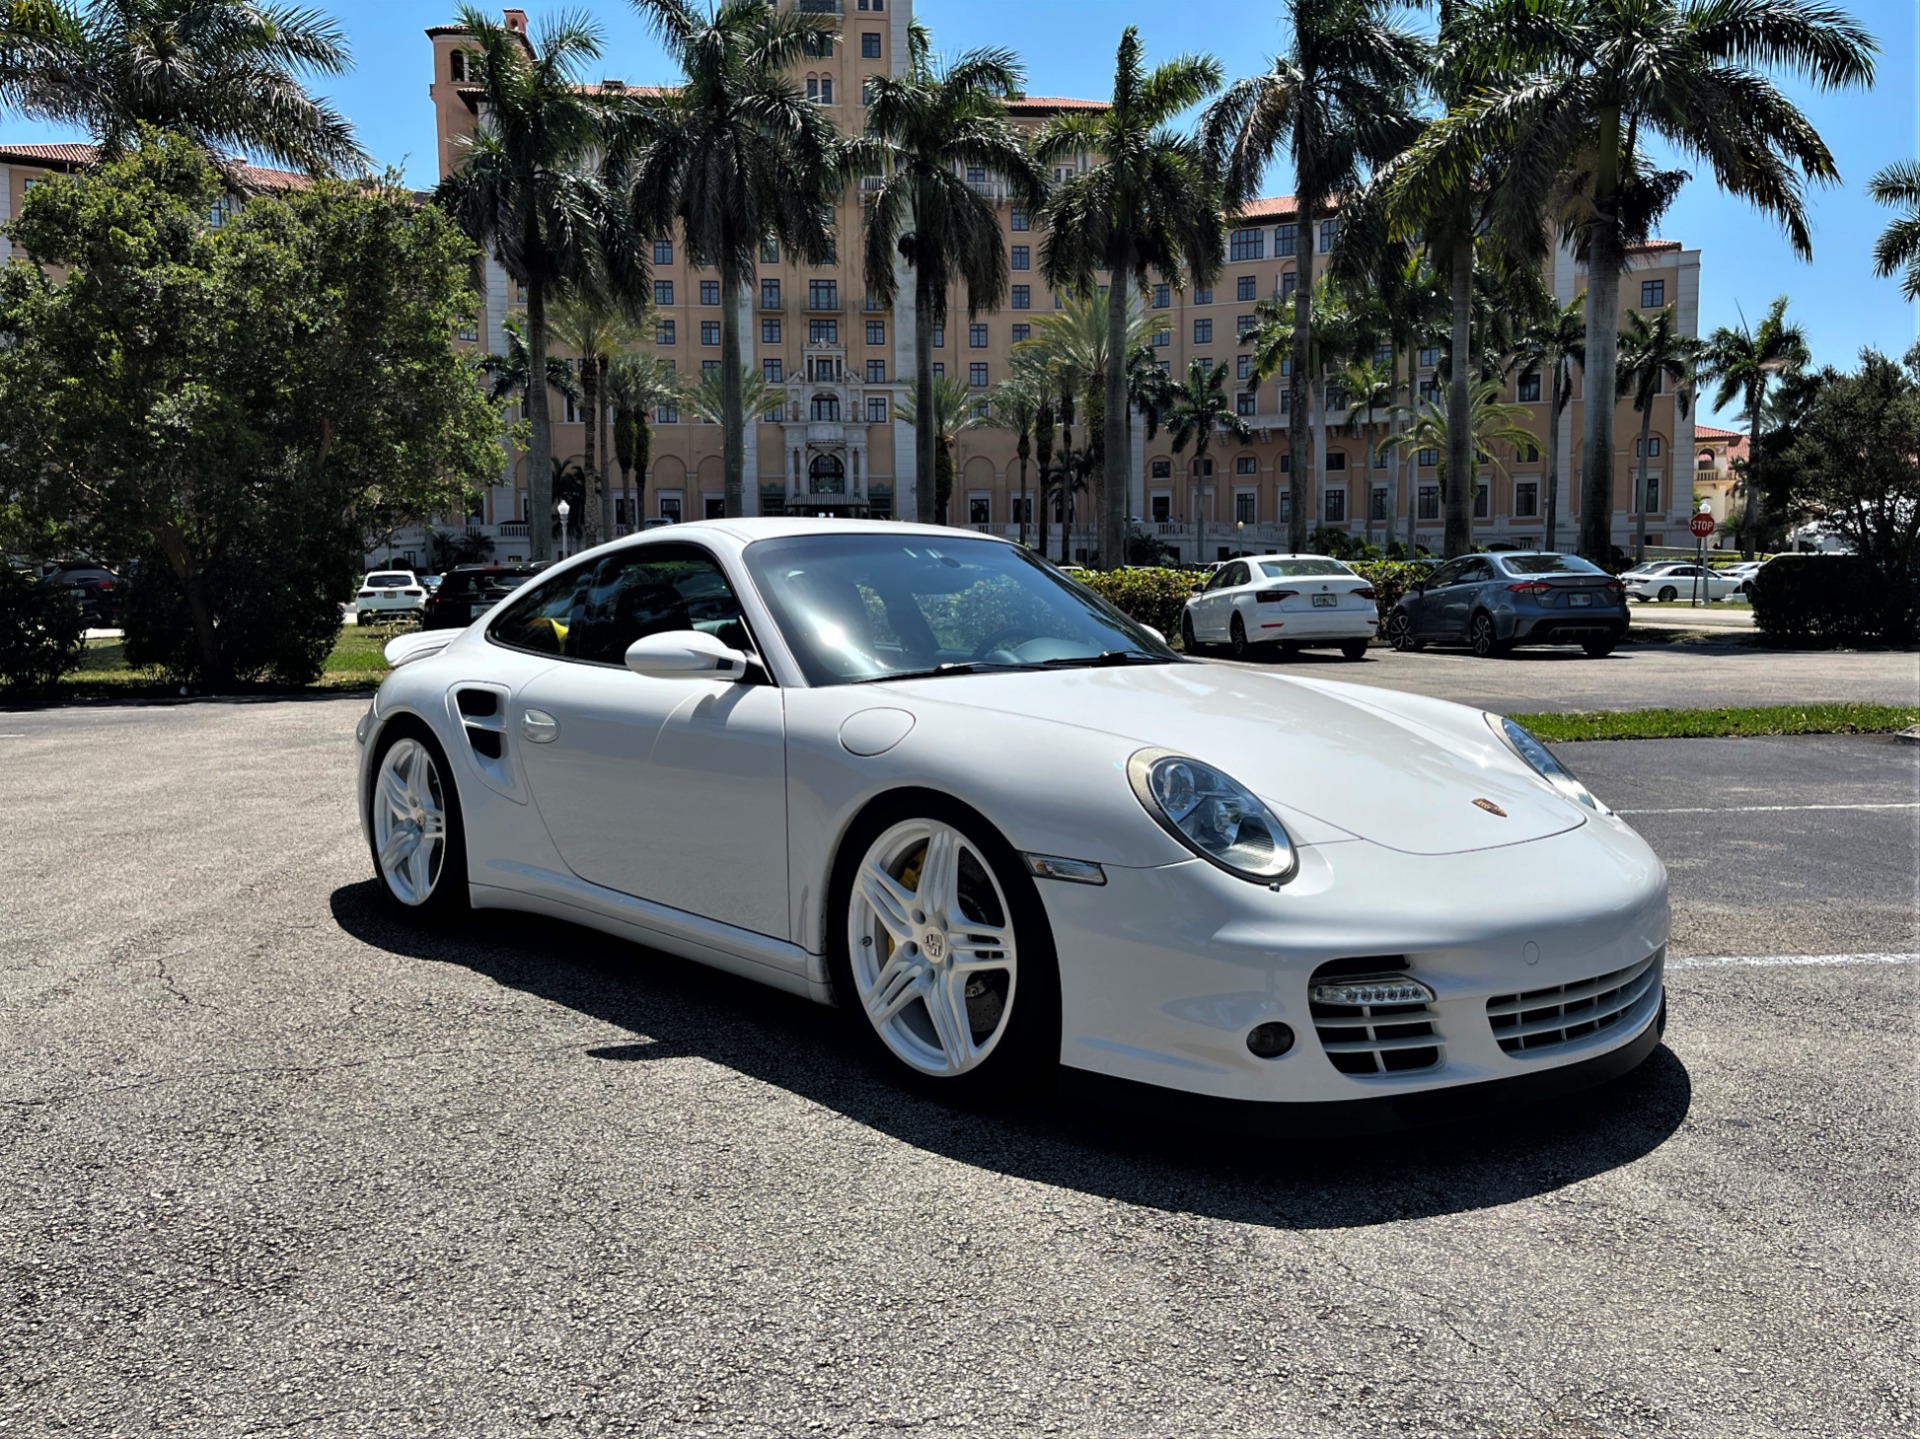 Used 2008 Porsche 911 Turbo for sale Sold at The Gables Sports Cars in Miami FL 33146 2